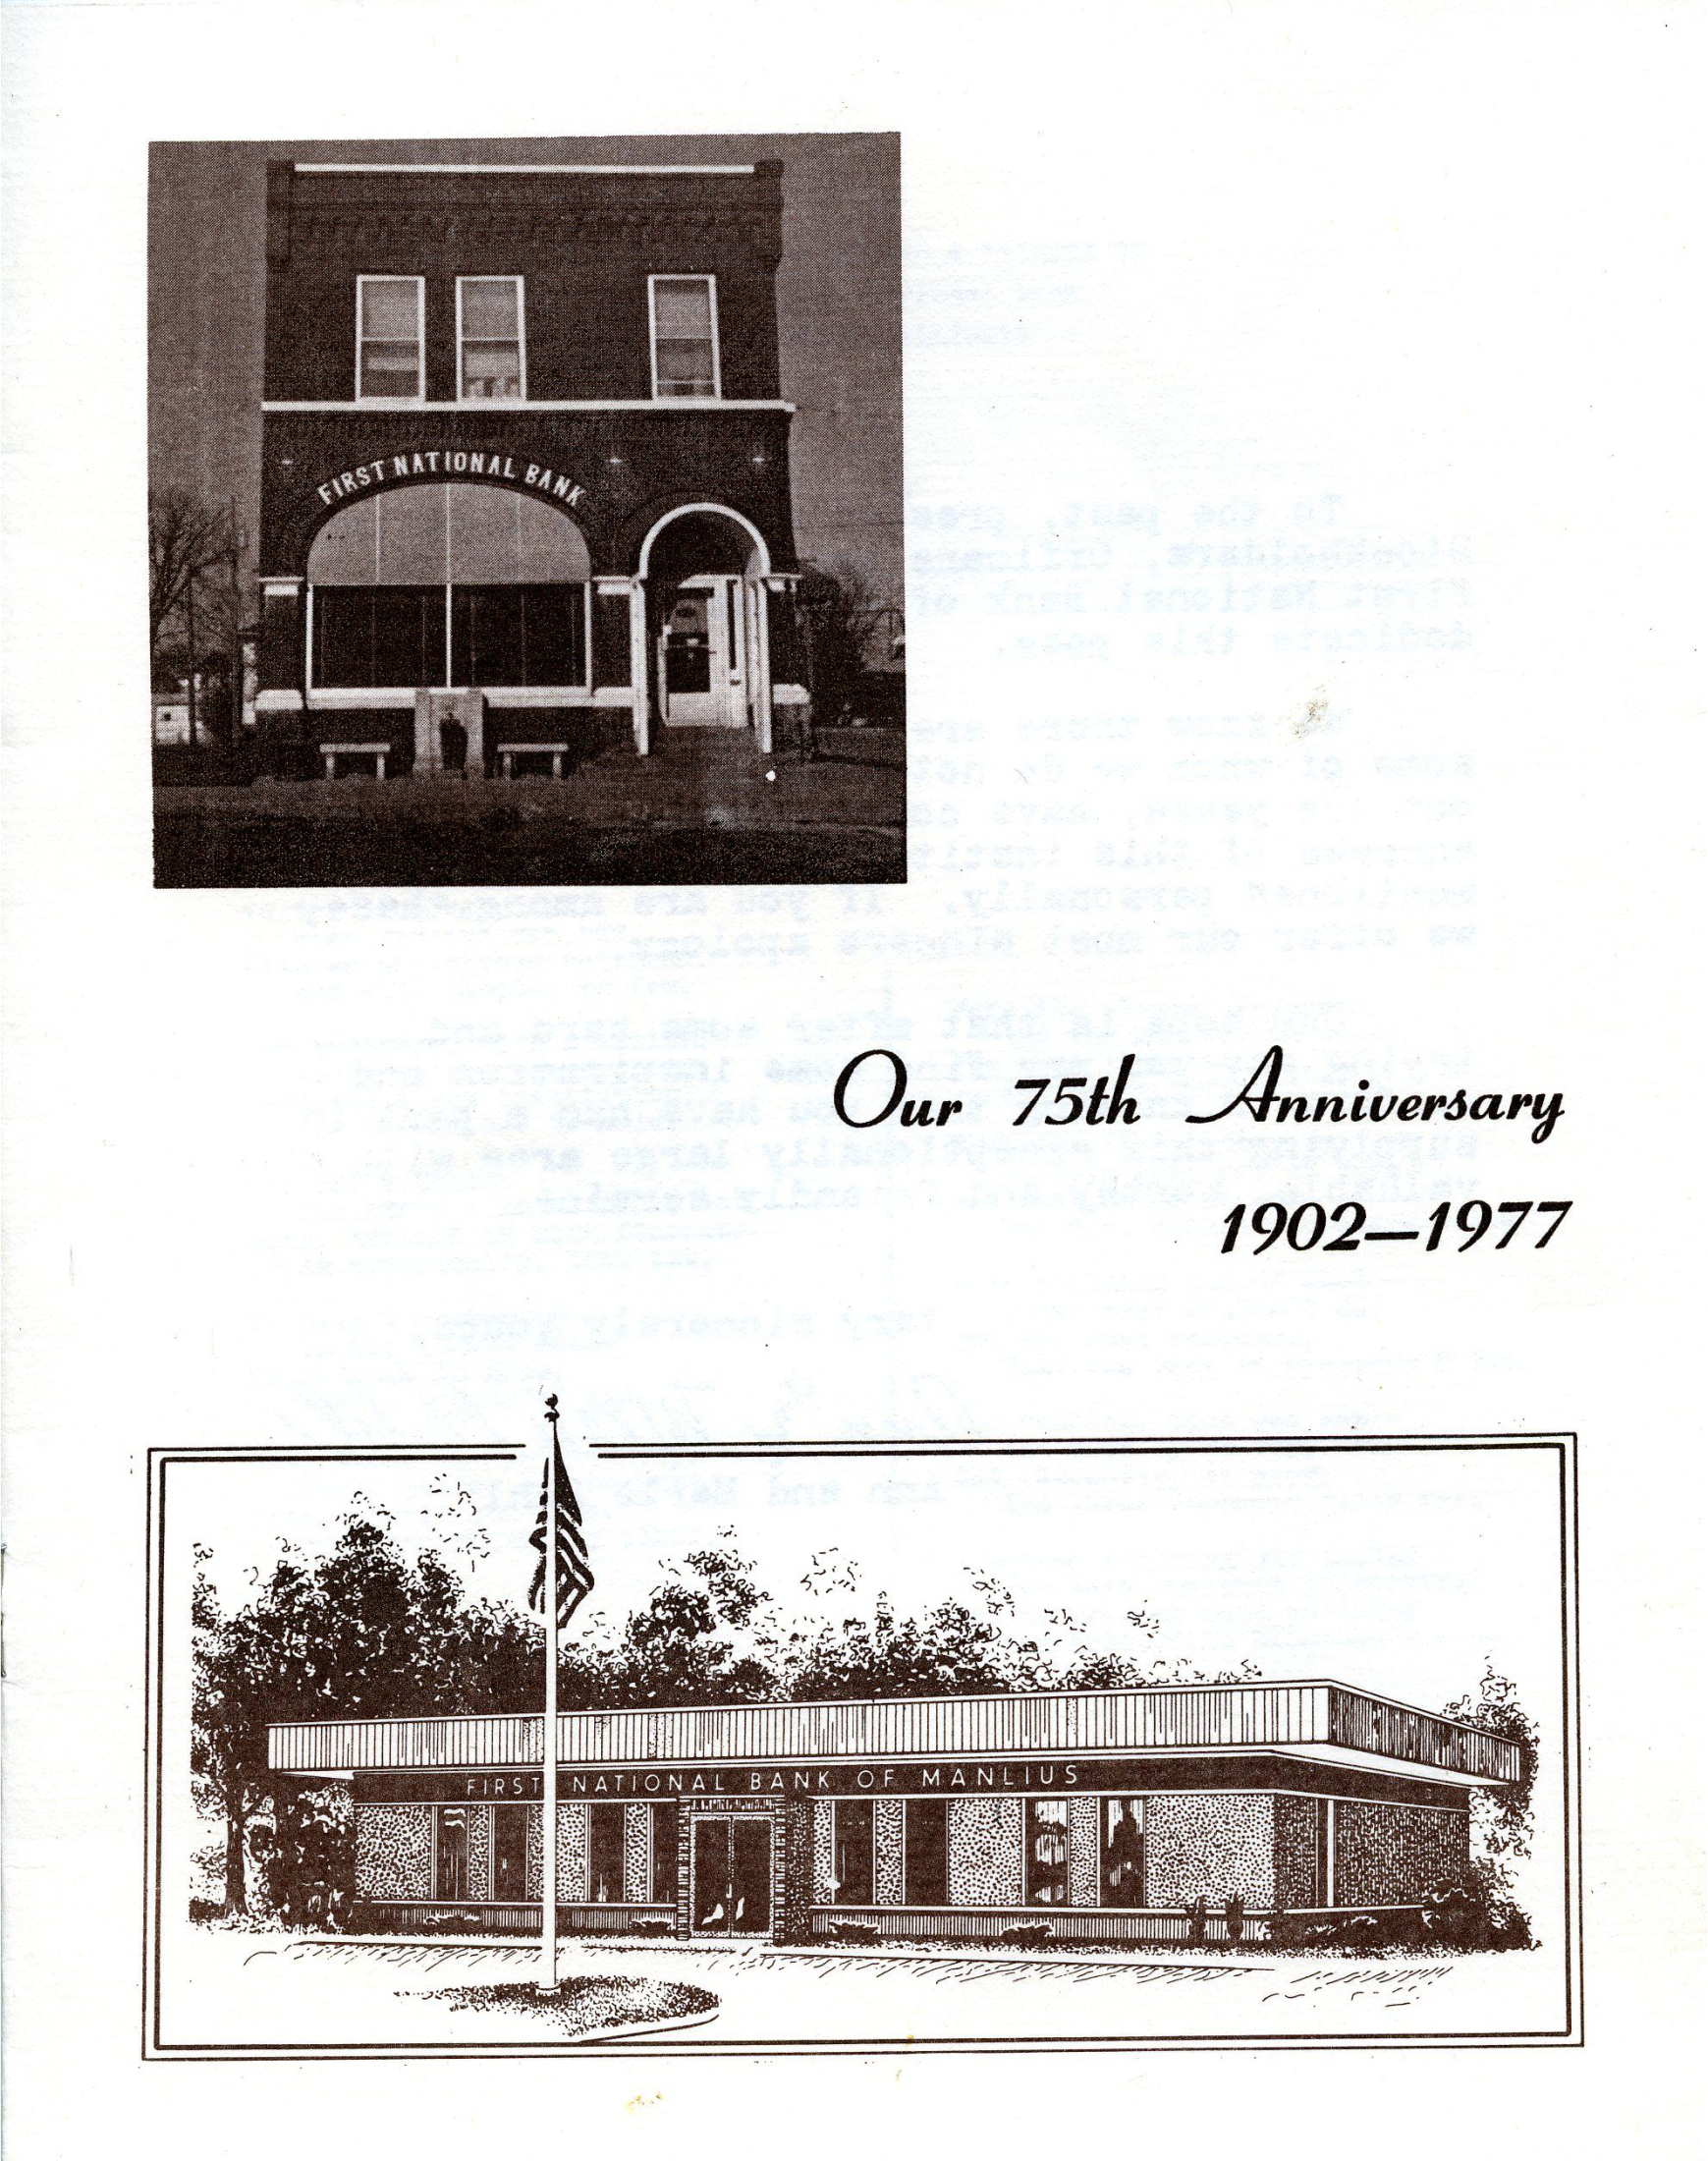 Album 12 FIRST NATIONAL BANK AND MANLIUS BANK Page 29